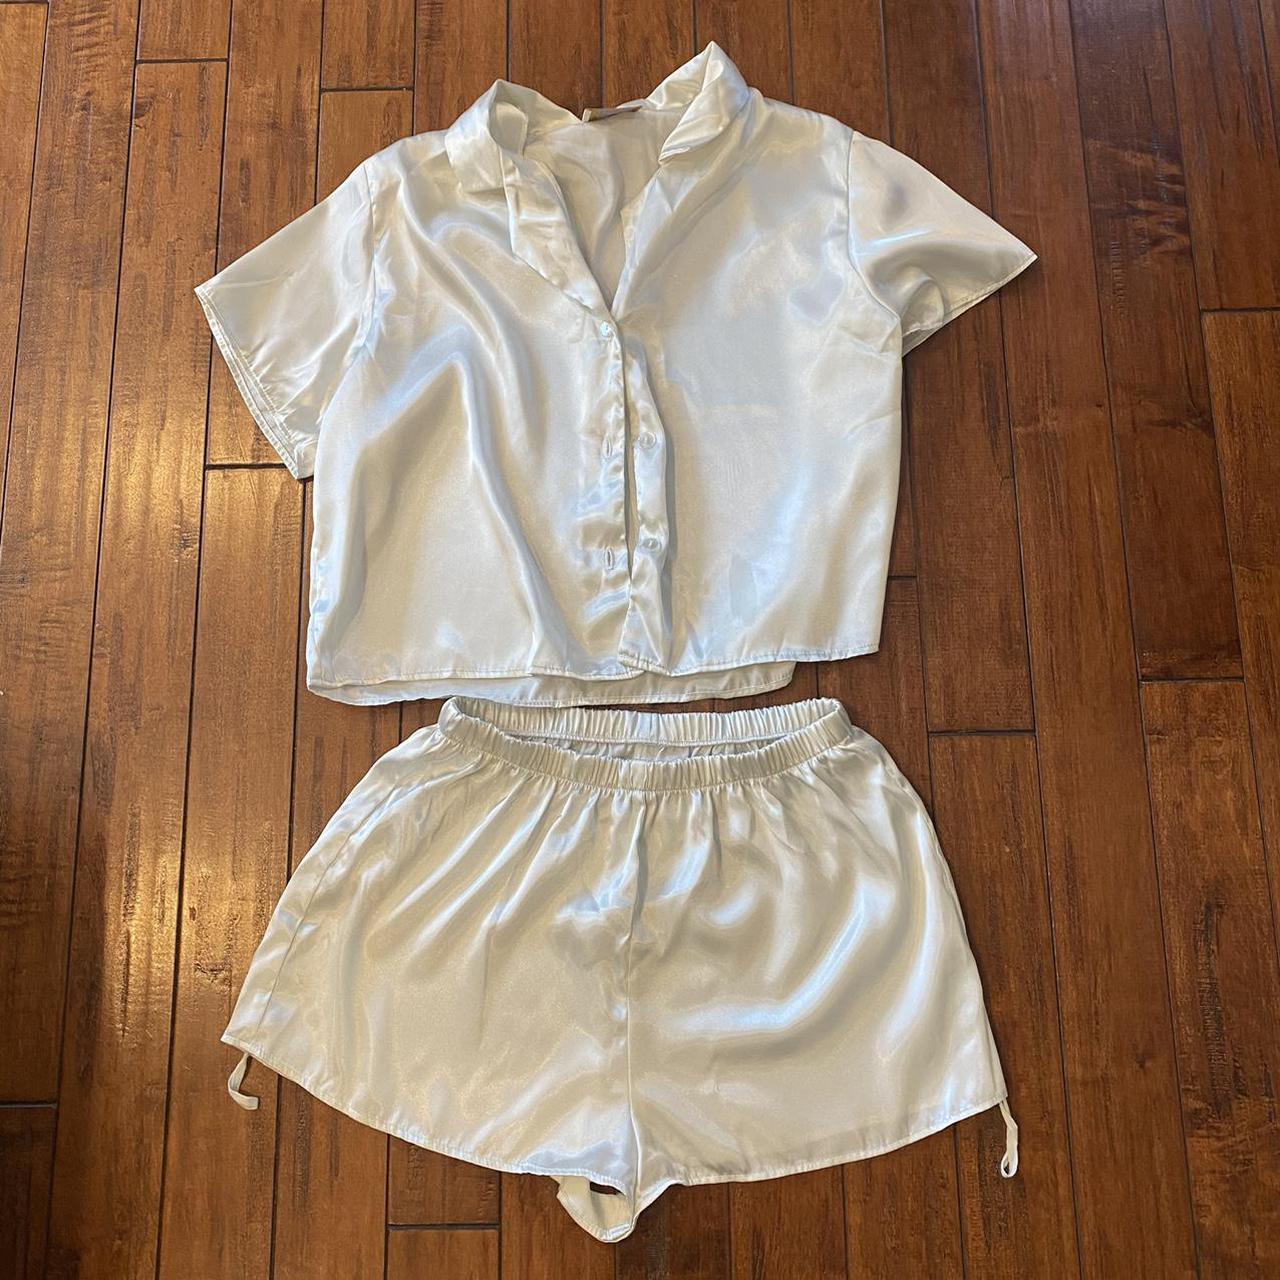 American Vintage Women's Cream and White Suit